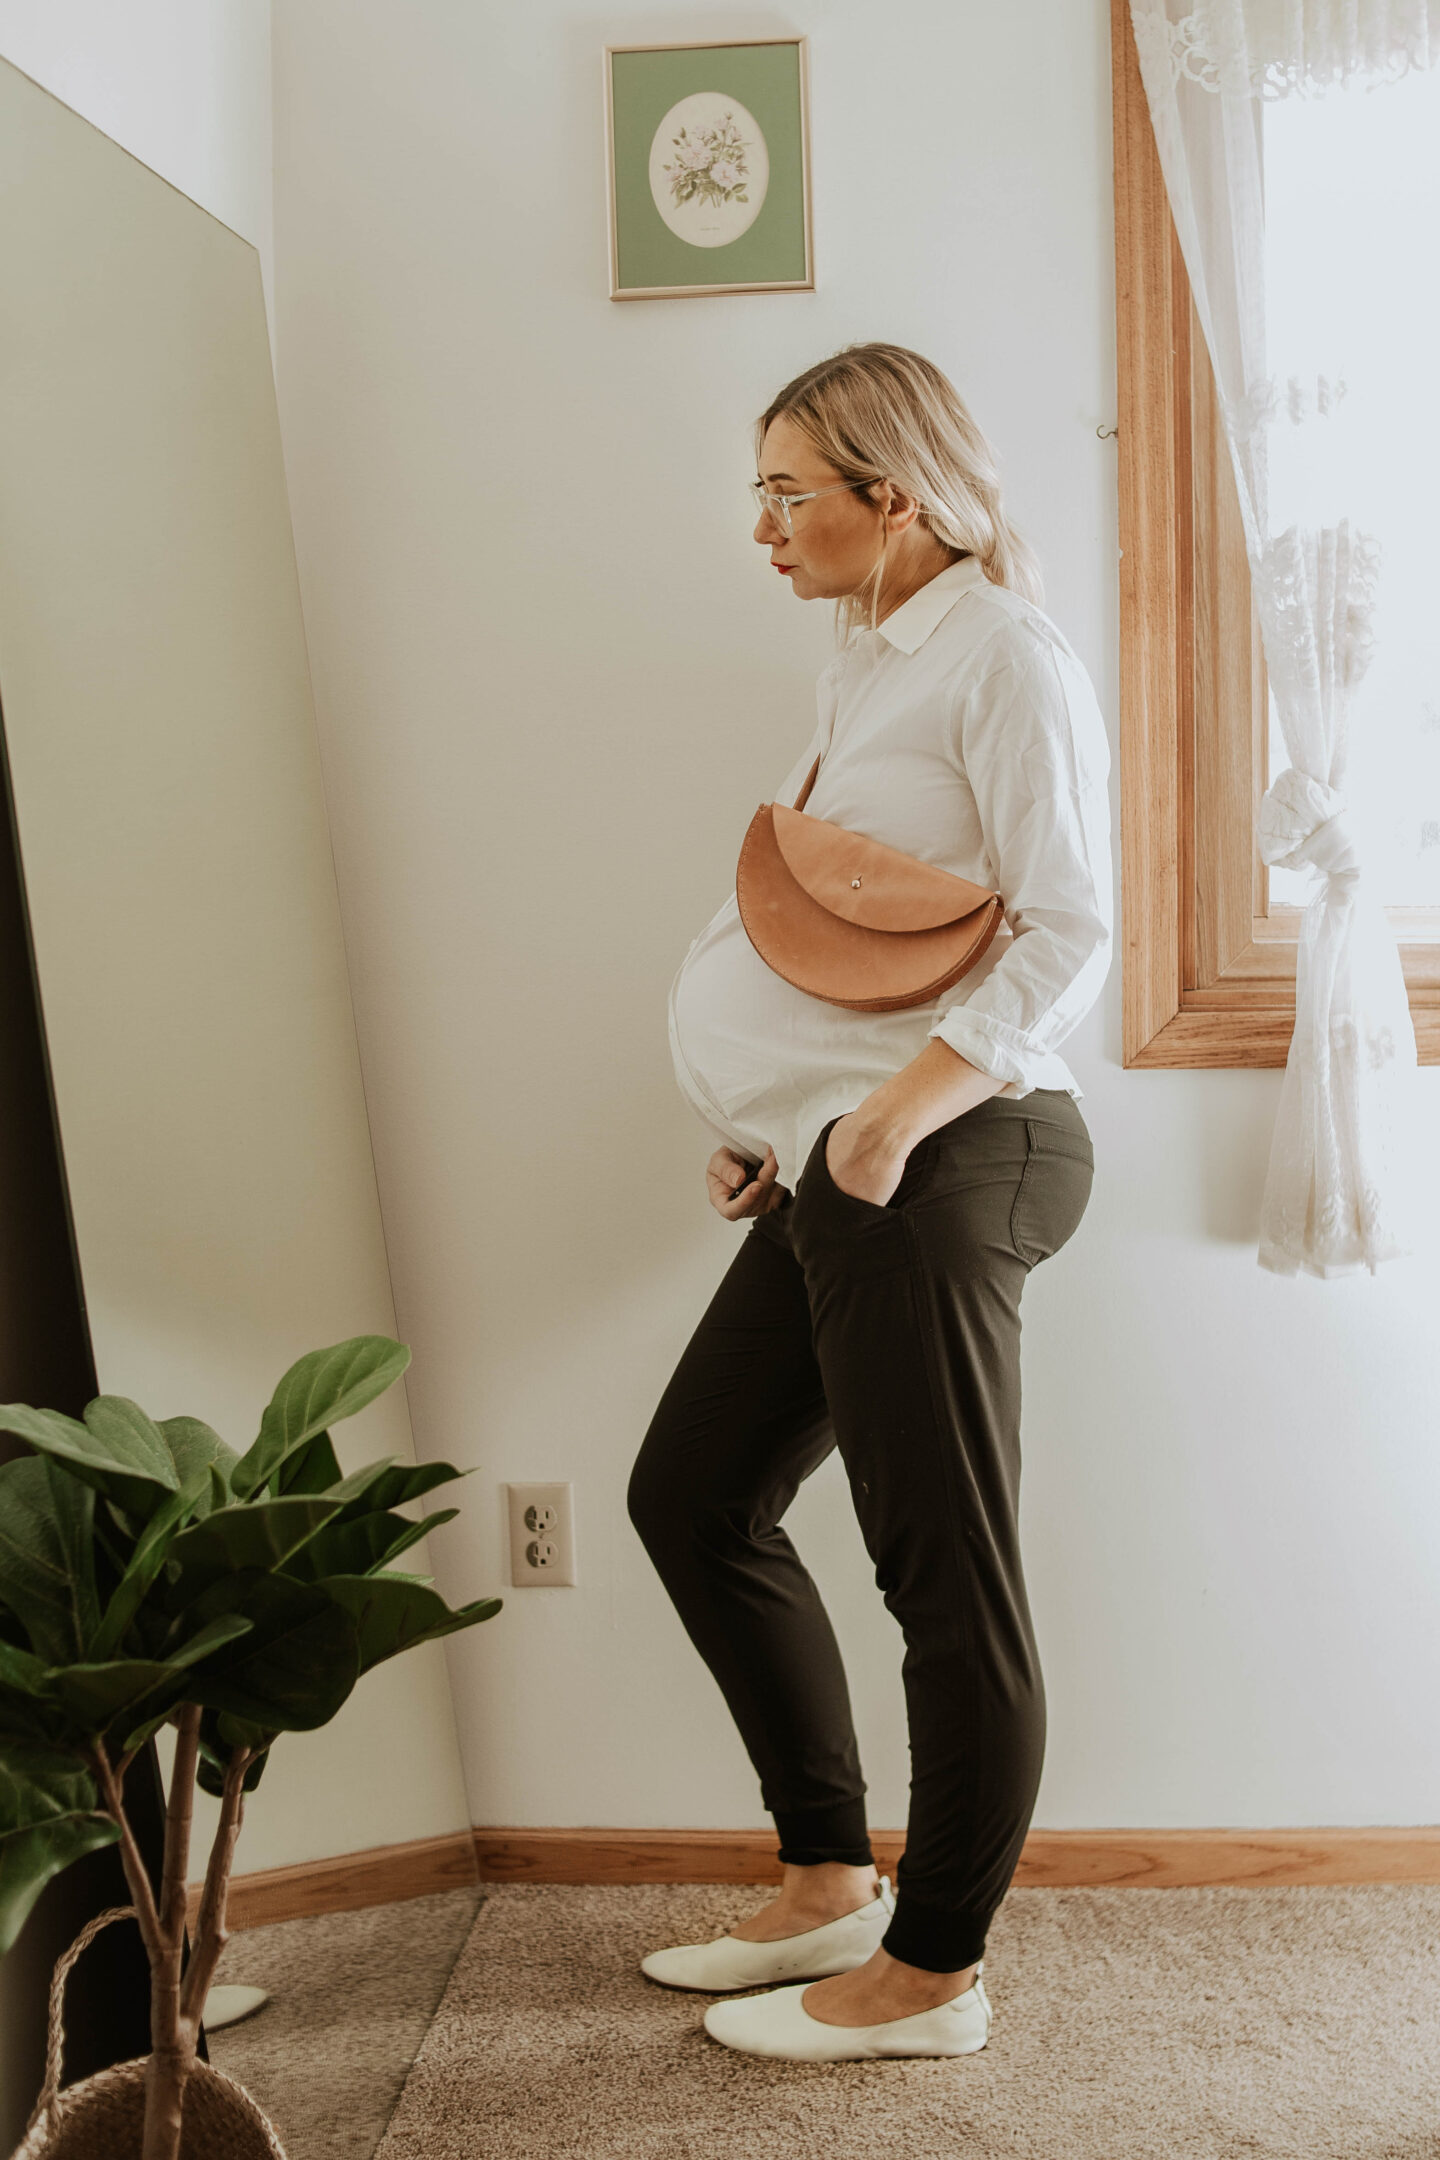 A Week of Outfits: Casual Maternity Outfits